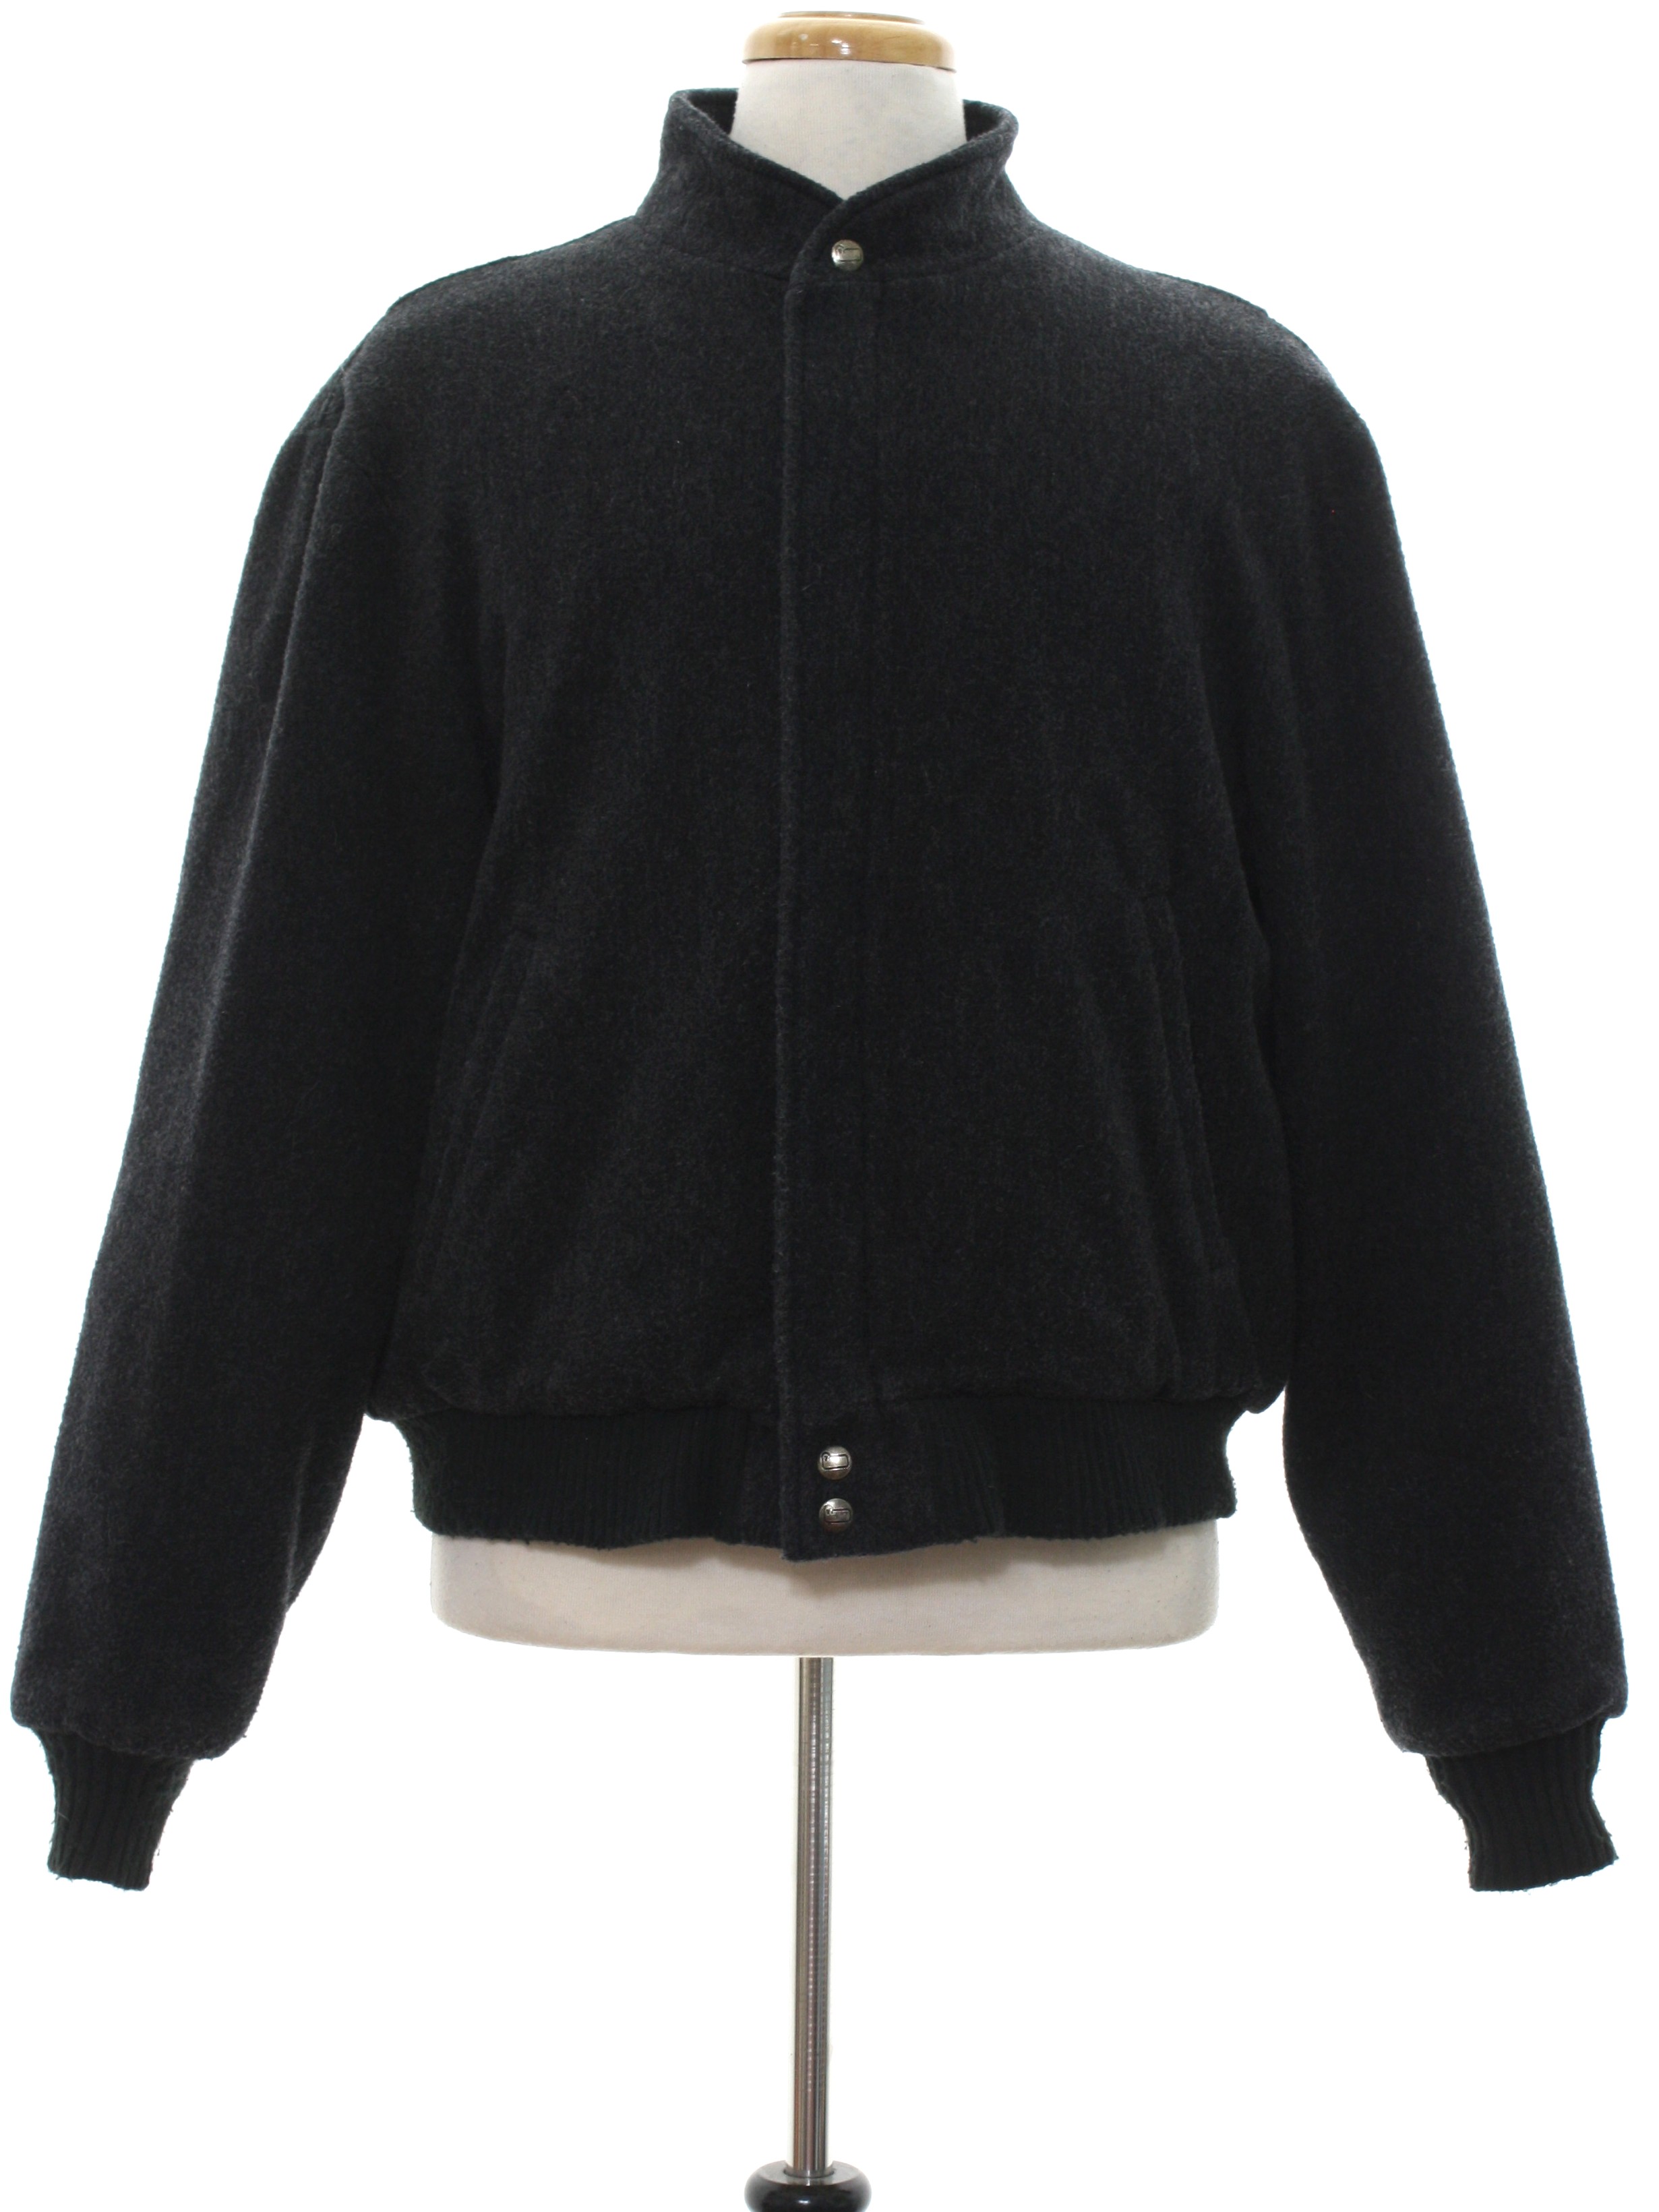 Vintage Woolrich 80's Jacket: 80s -Woolrich- Mens heathered charcoal ...